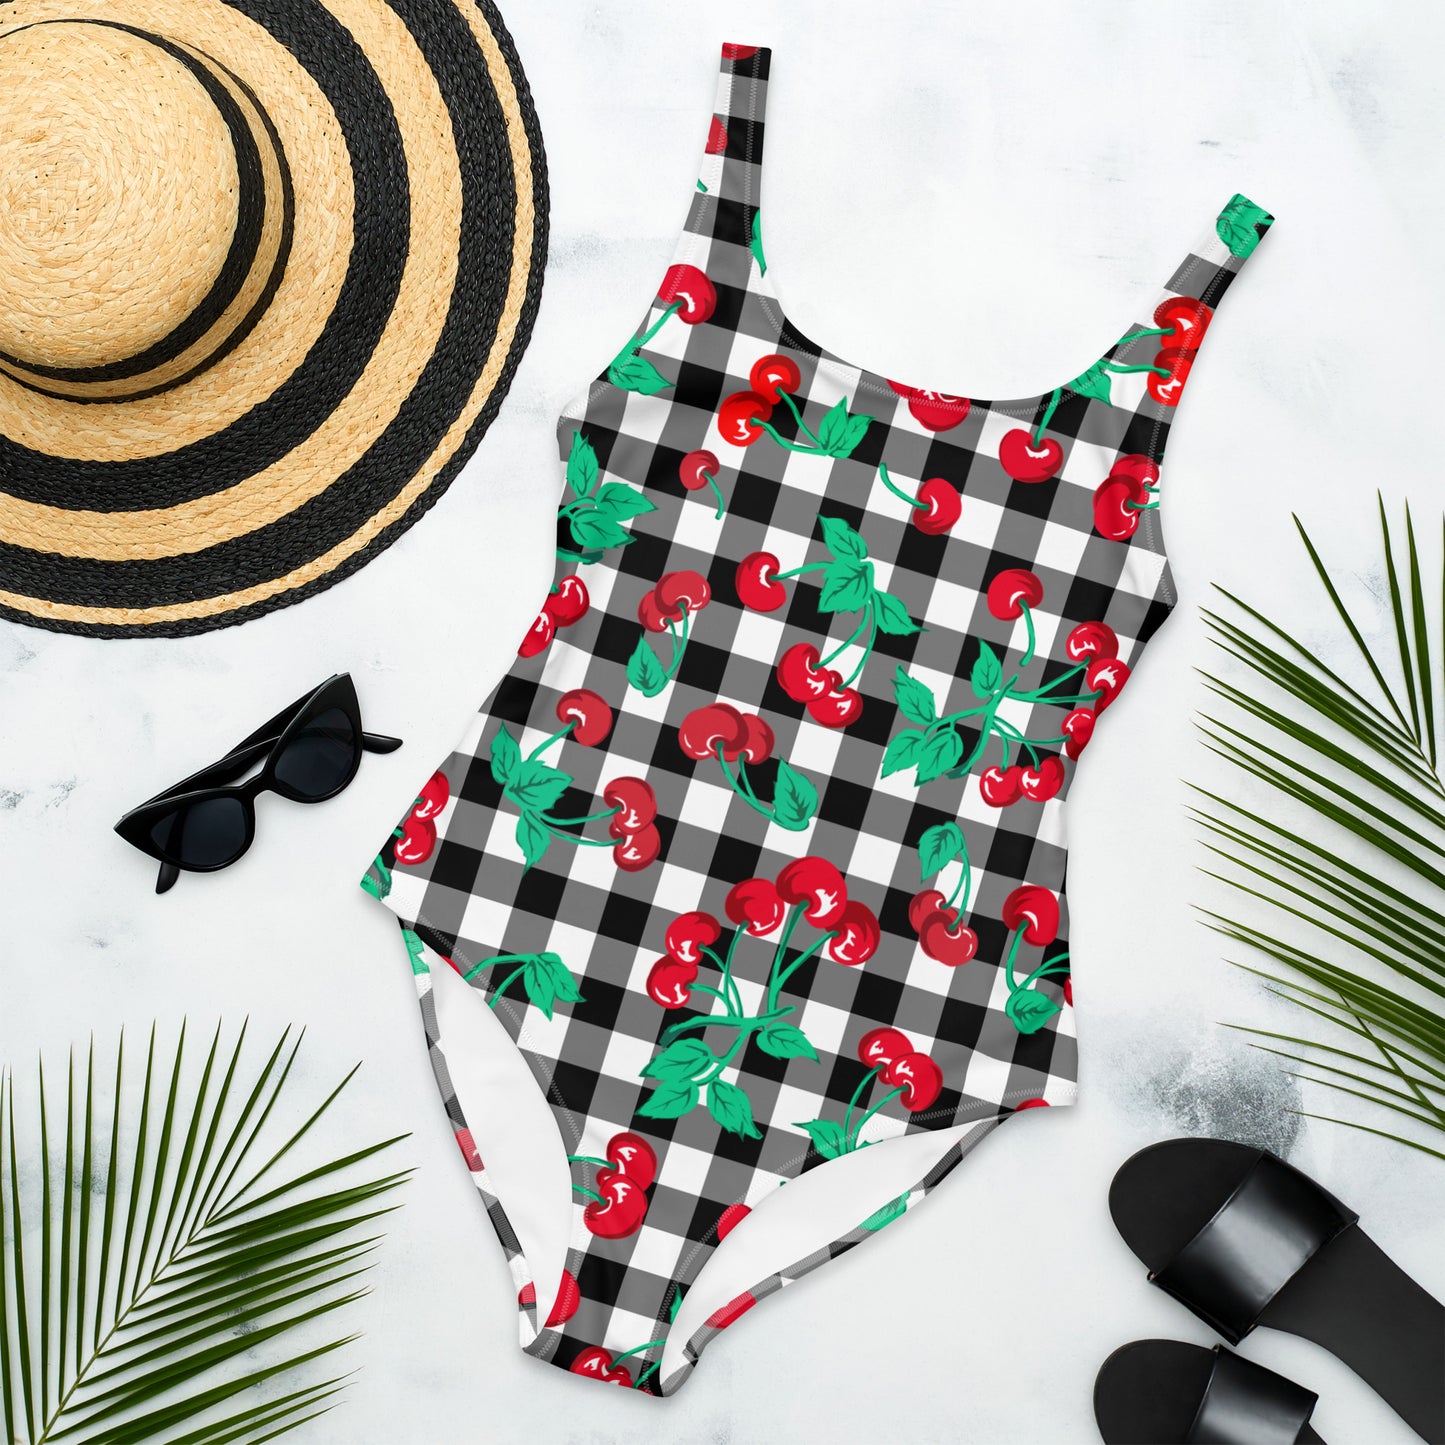 Rory Black Gingham Cherry Girl One-Piece Swimsuit | Pinup Couture Swim